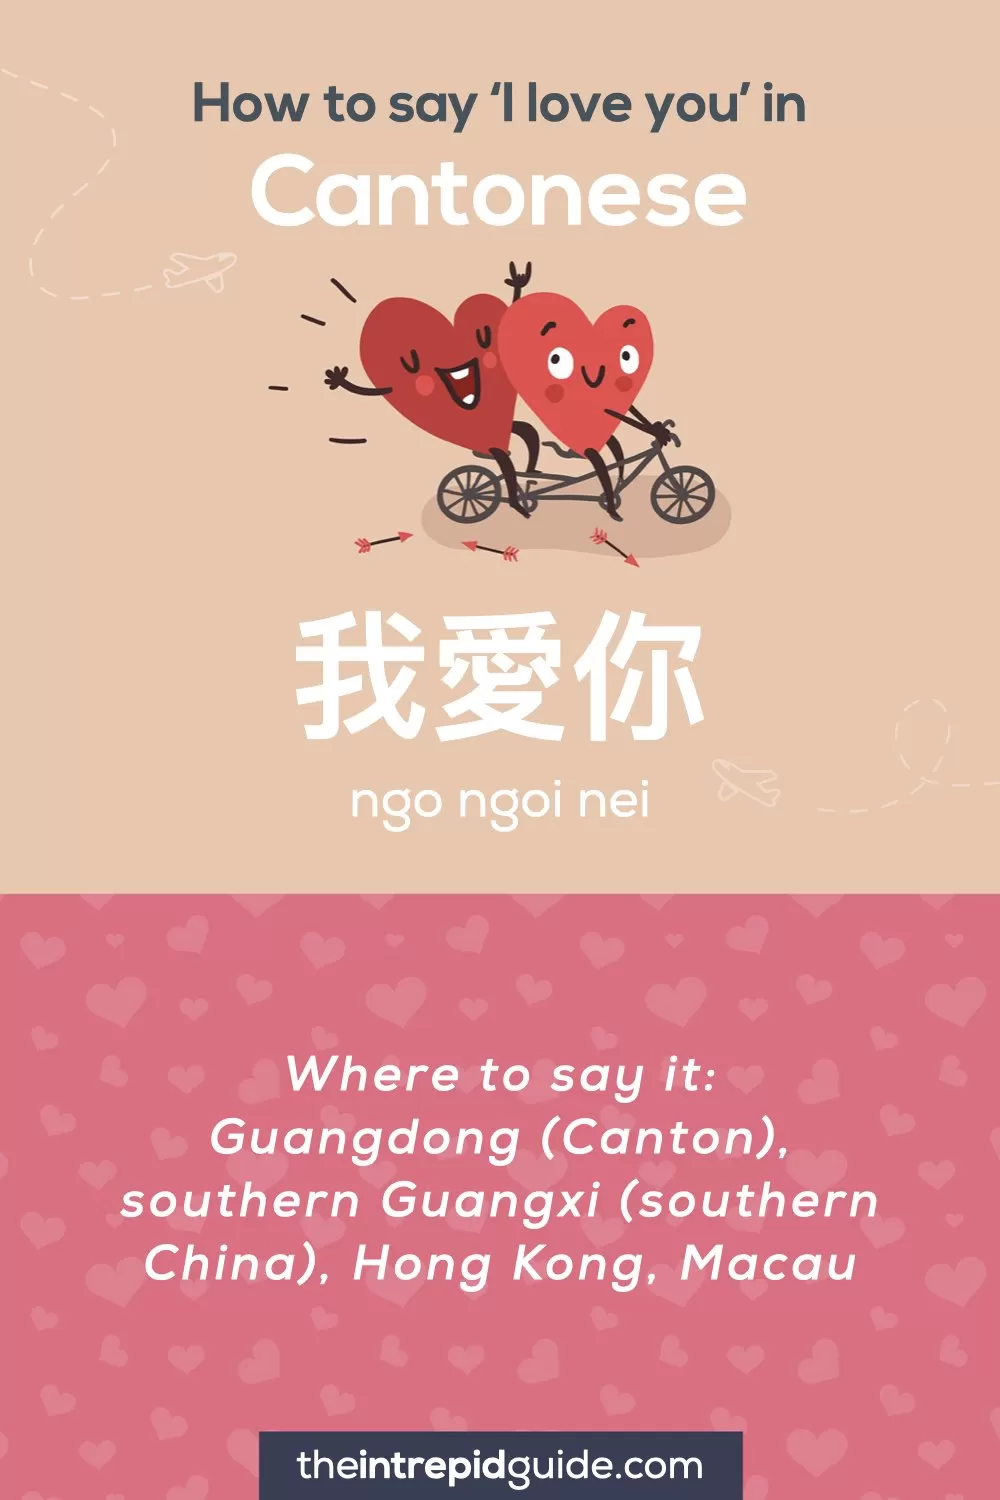 How to say I love you in different languages - Cantonese - 我愛你